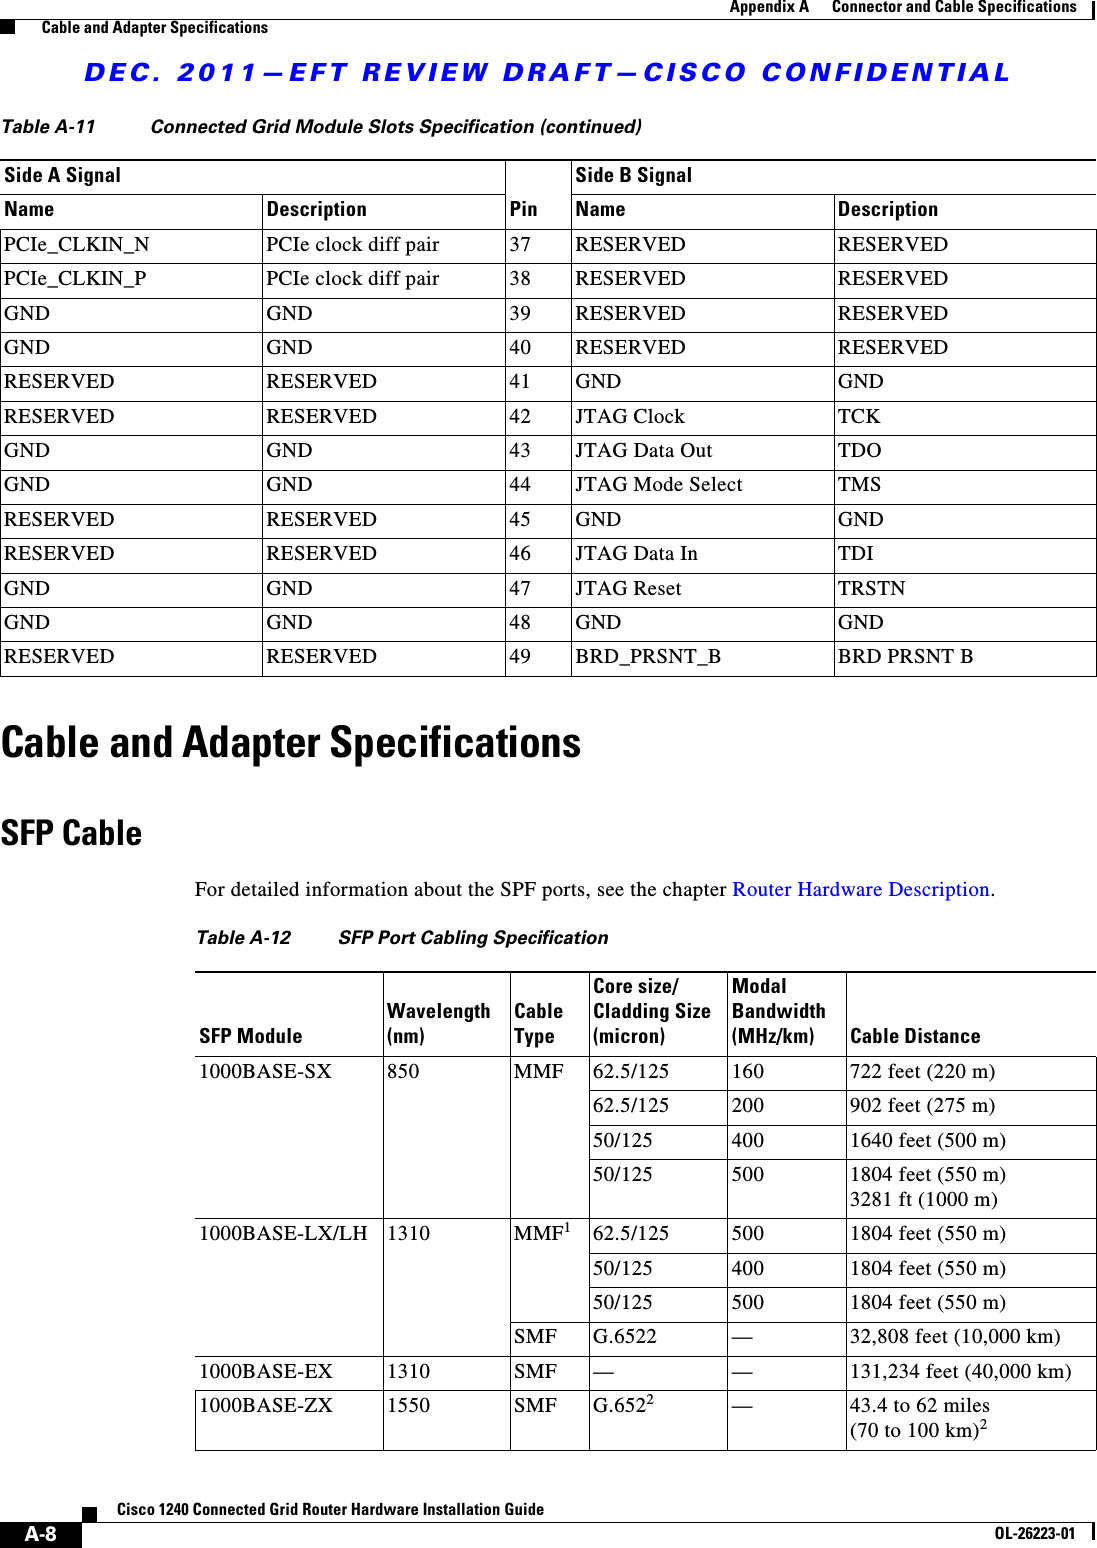 DEC. 2011—EFT REVIEW DRAFT—CISCO CONFIDENTIALA-8Cisco 1240 Connected Grid Router Hardware Installation GuideOL-26223-01Appendix A      Connector and Cable Specifications  Cable and Adapter SpecificationsCable and Adapter SpecificationsSFP CableFor detailed information about the SPF ports, see the chapter Router Hardware Description.PCIe_CLKIN_N PCIe clock diff pair 37 RESERVED RESERVEDPCIe_CLKIN_P PCIe clock diff pair 38 RESERVED RESERVEDGND GND 39 RESERVED RESERVEDGND GND 40 RESERVED RESERVEDRESERVED RESERVED 41 GND GNDRESERVED RESERVED 42 JTAG Clock  TCKGND GND 43 JTAG Data Out  TDOGND GND 44 JTAG Mode Select  TMSRESERVED RESERVED 45 GND GNDRESERVED RESERVED 46 JTAG Data In  TDIGND GND 47 JTAG Reset  TRSTNGND GND 48 GND GNDRESERVED RESERVED 49 BRD_PRSNT_B BRD PRSNT BTable A-11 Connected Grid Module Slots Specification (continued)Side A SignalPinSide B SignalName Description Name DescriptionTable A-12 SFP Port Cabling Specification SFP ModuleWavelength (nm)Cable TypeCore size/ Cladding Size (micron)Modal Bandwidth (MHz/km) Cable Distance1000BASE-SX 850 MMF 62.5/125 160 722 feet (220 m)62.5/125 200 902 feet (275 m)50/125 400 1640 feet (500 m)50/125 500 1804 feet (550 m) 3281 ft (1000 m)1000BASE-LX/LH 1310 MMF162.5/125 500 1804 feet (550 m)50/125 400 1804 feet (550 m)50/125 500 1804 feet (550 m)SMF G.6522 —32,808 feet (10,000 km)1000BASE-EX 1310 SMF — — 131,234 feet (40,000 km)1000BASE-ZX 1550 SMF G.6522—43.4 to 62 miles  (70 to 100 km)2